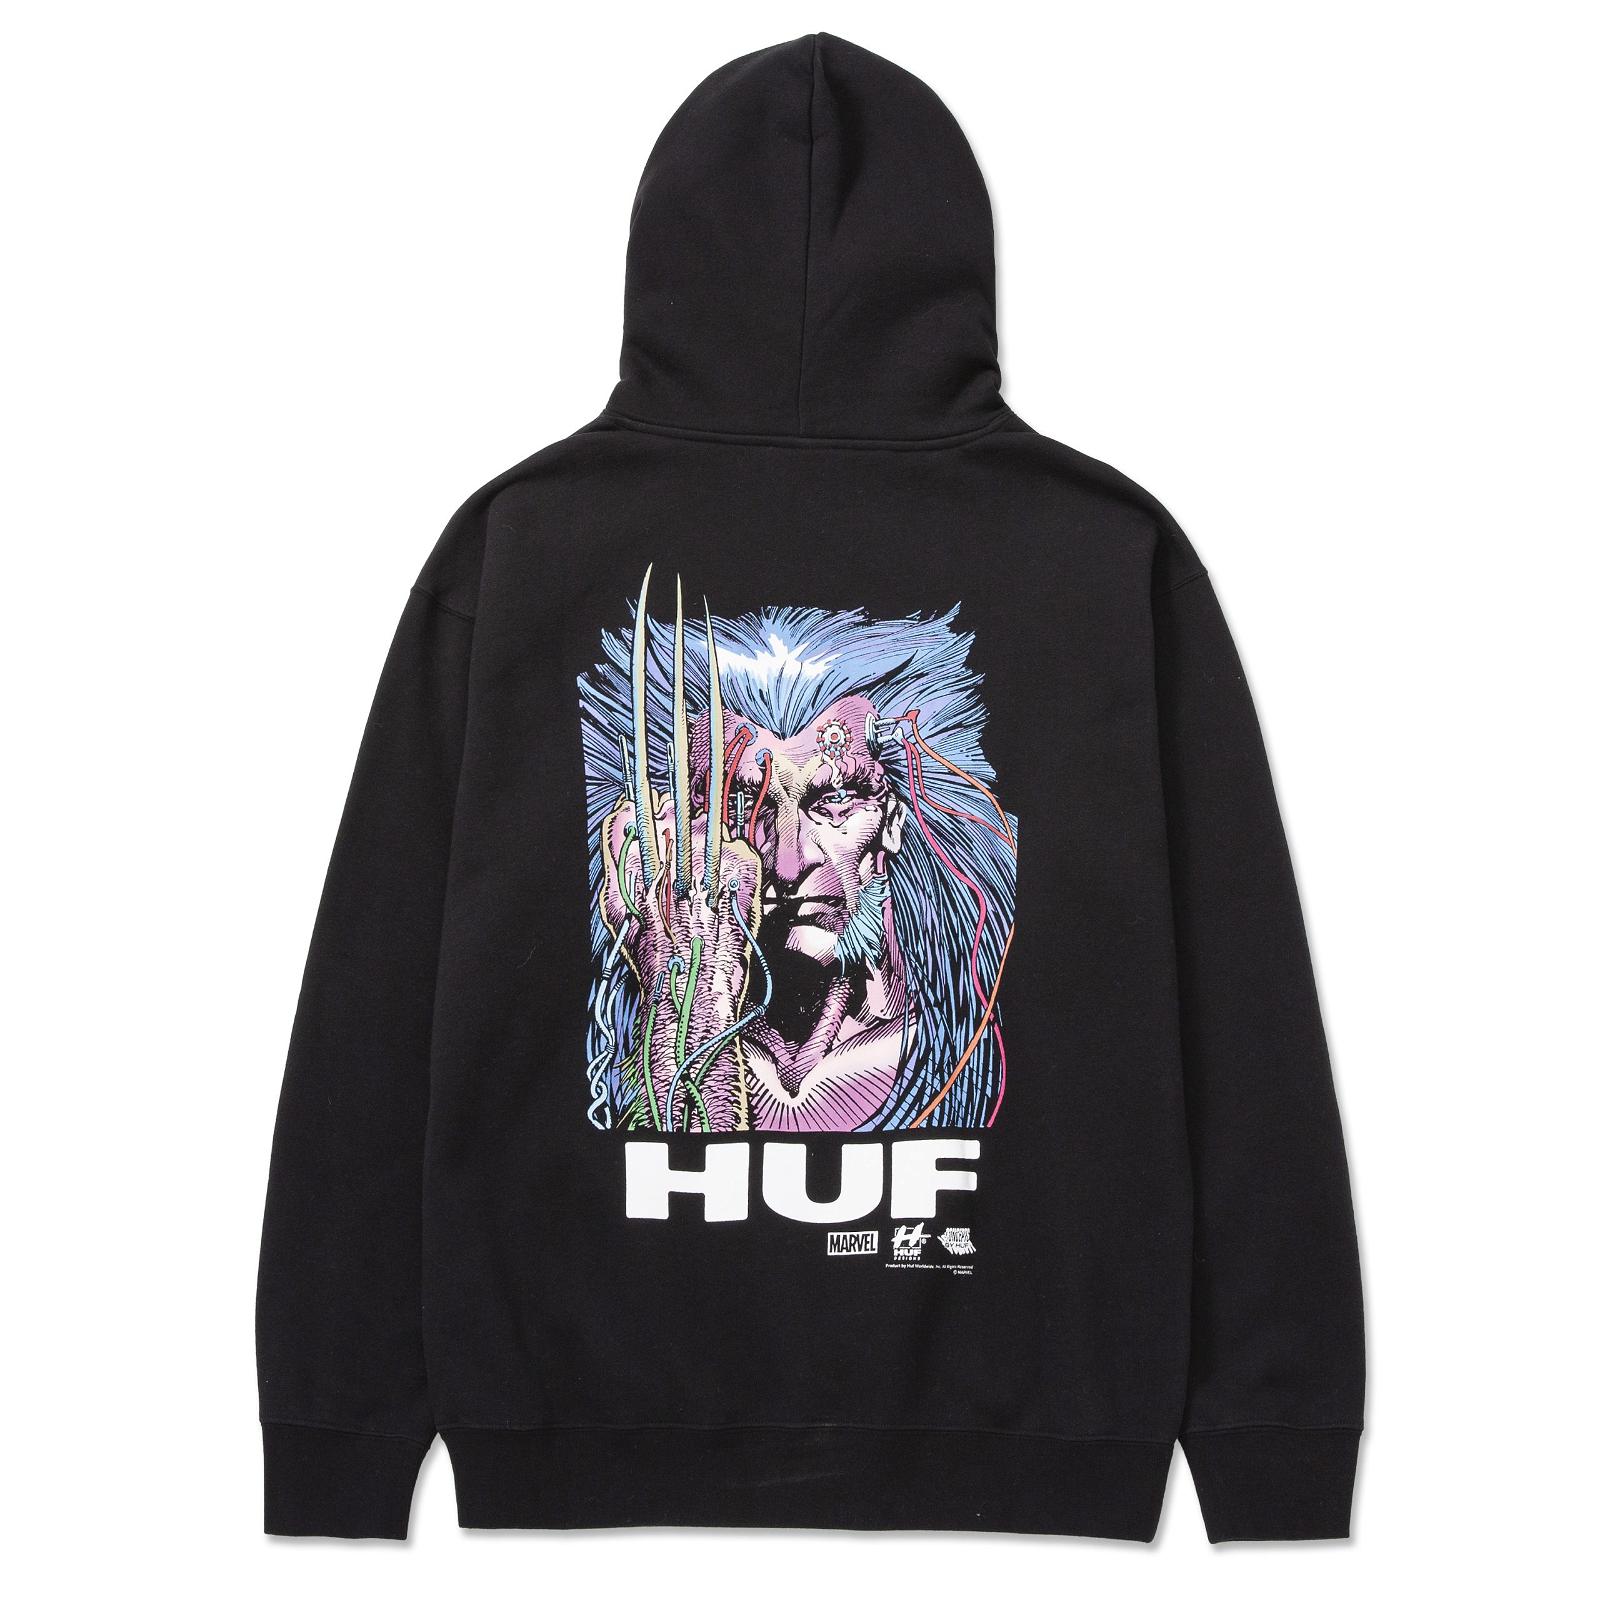 Marvel x HUF collection